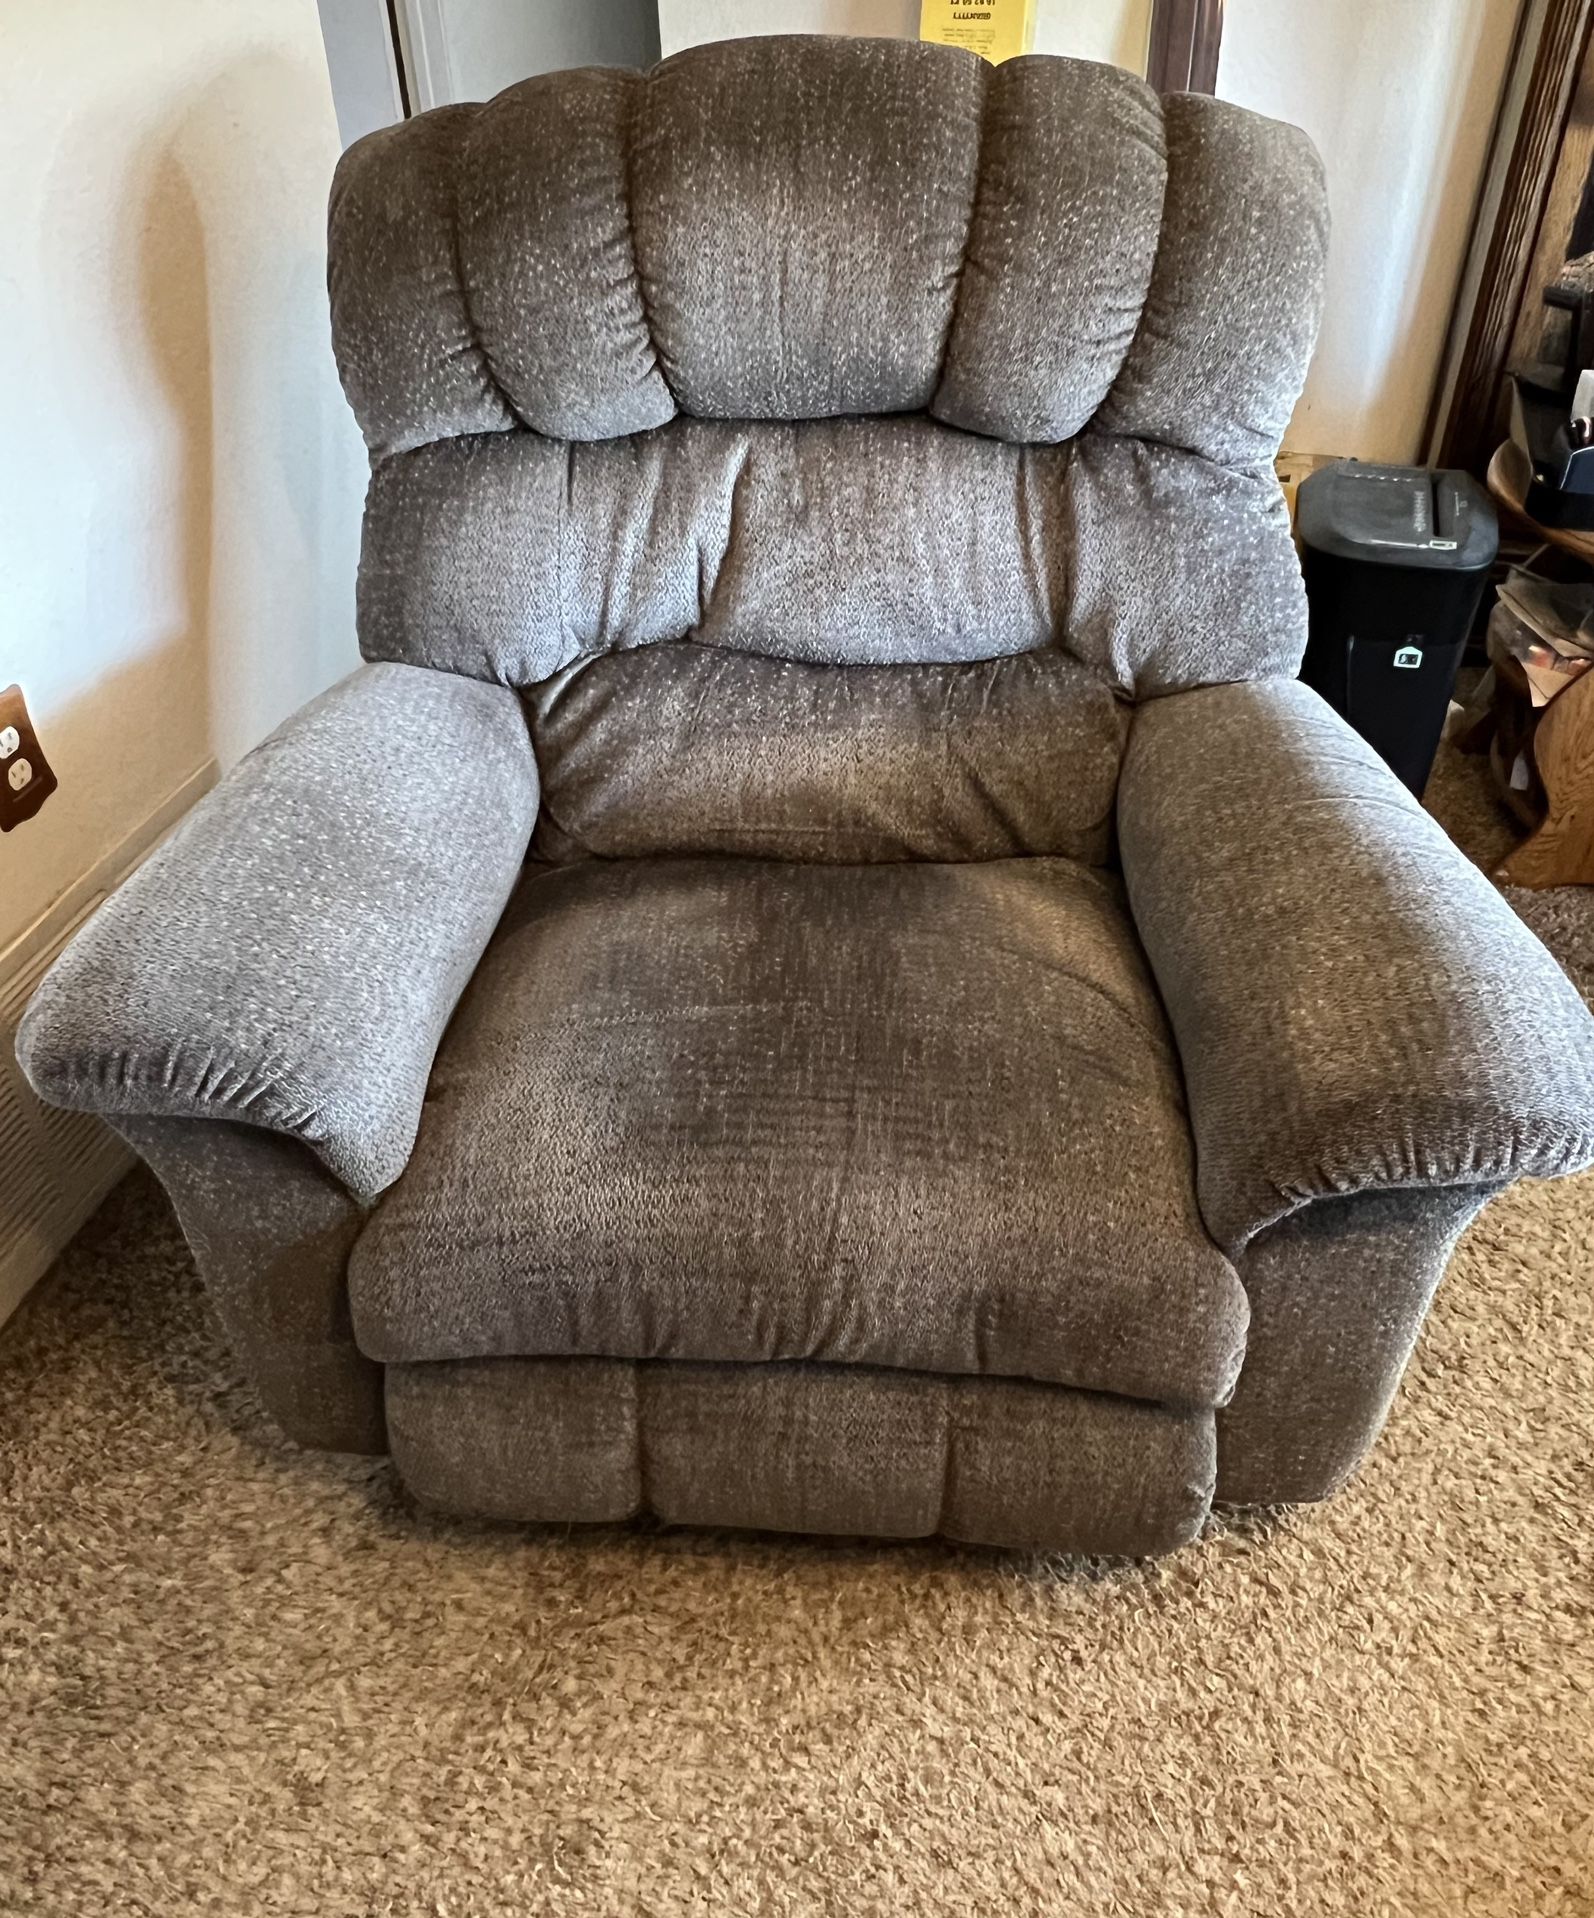 LaZBoy Recliner - Great Condition - $100 OBO